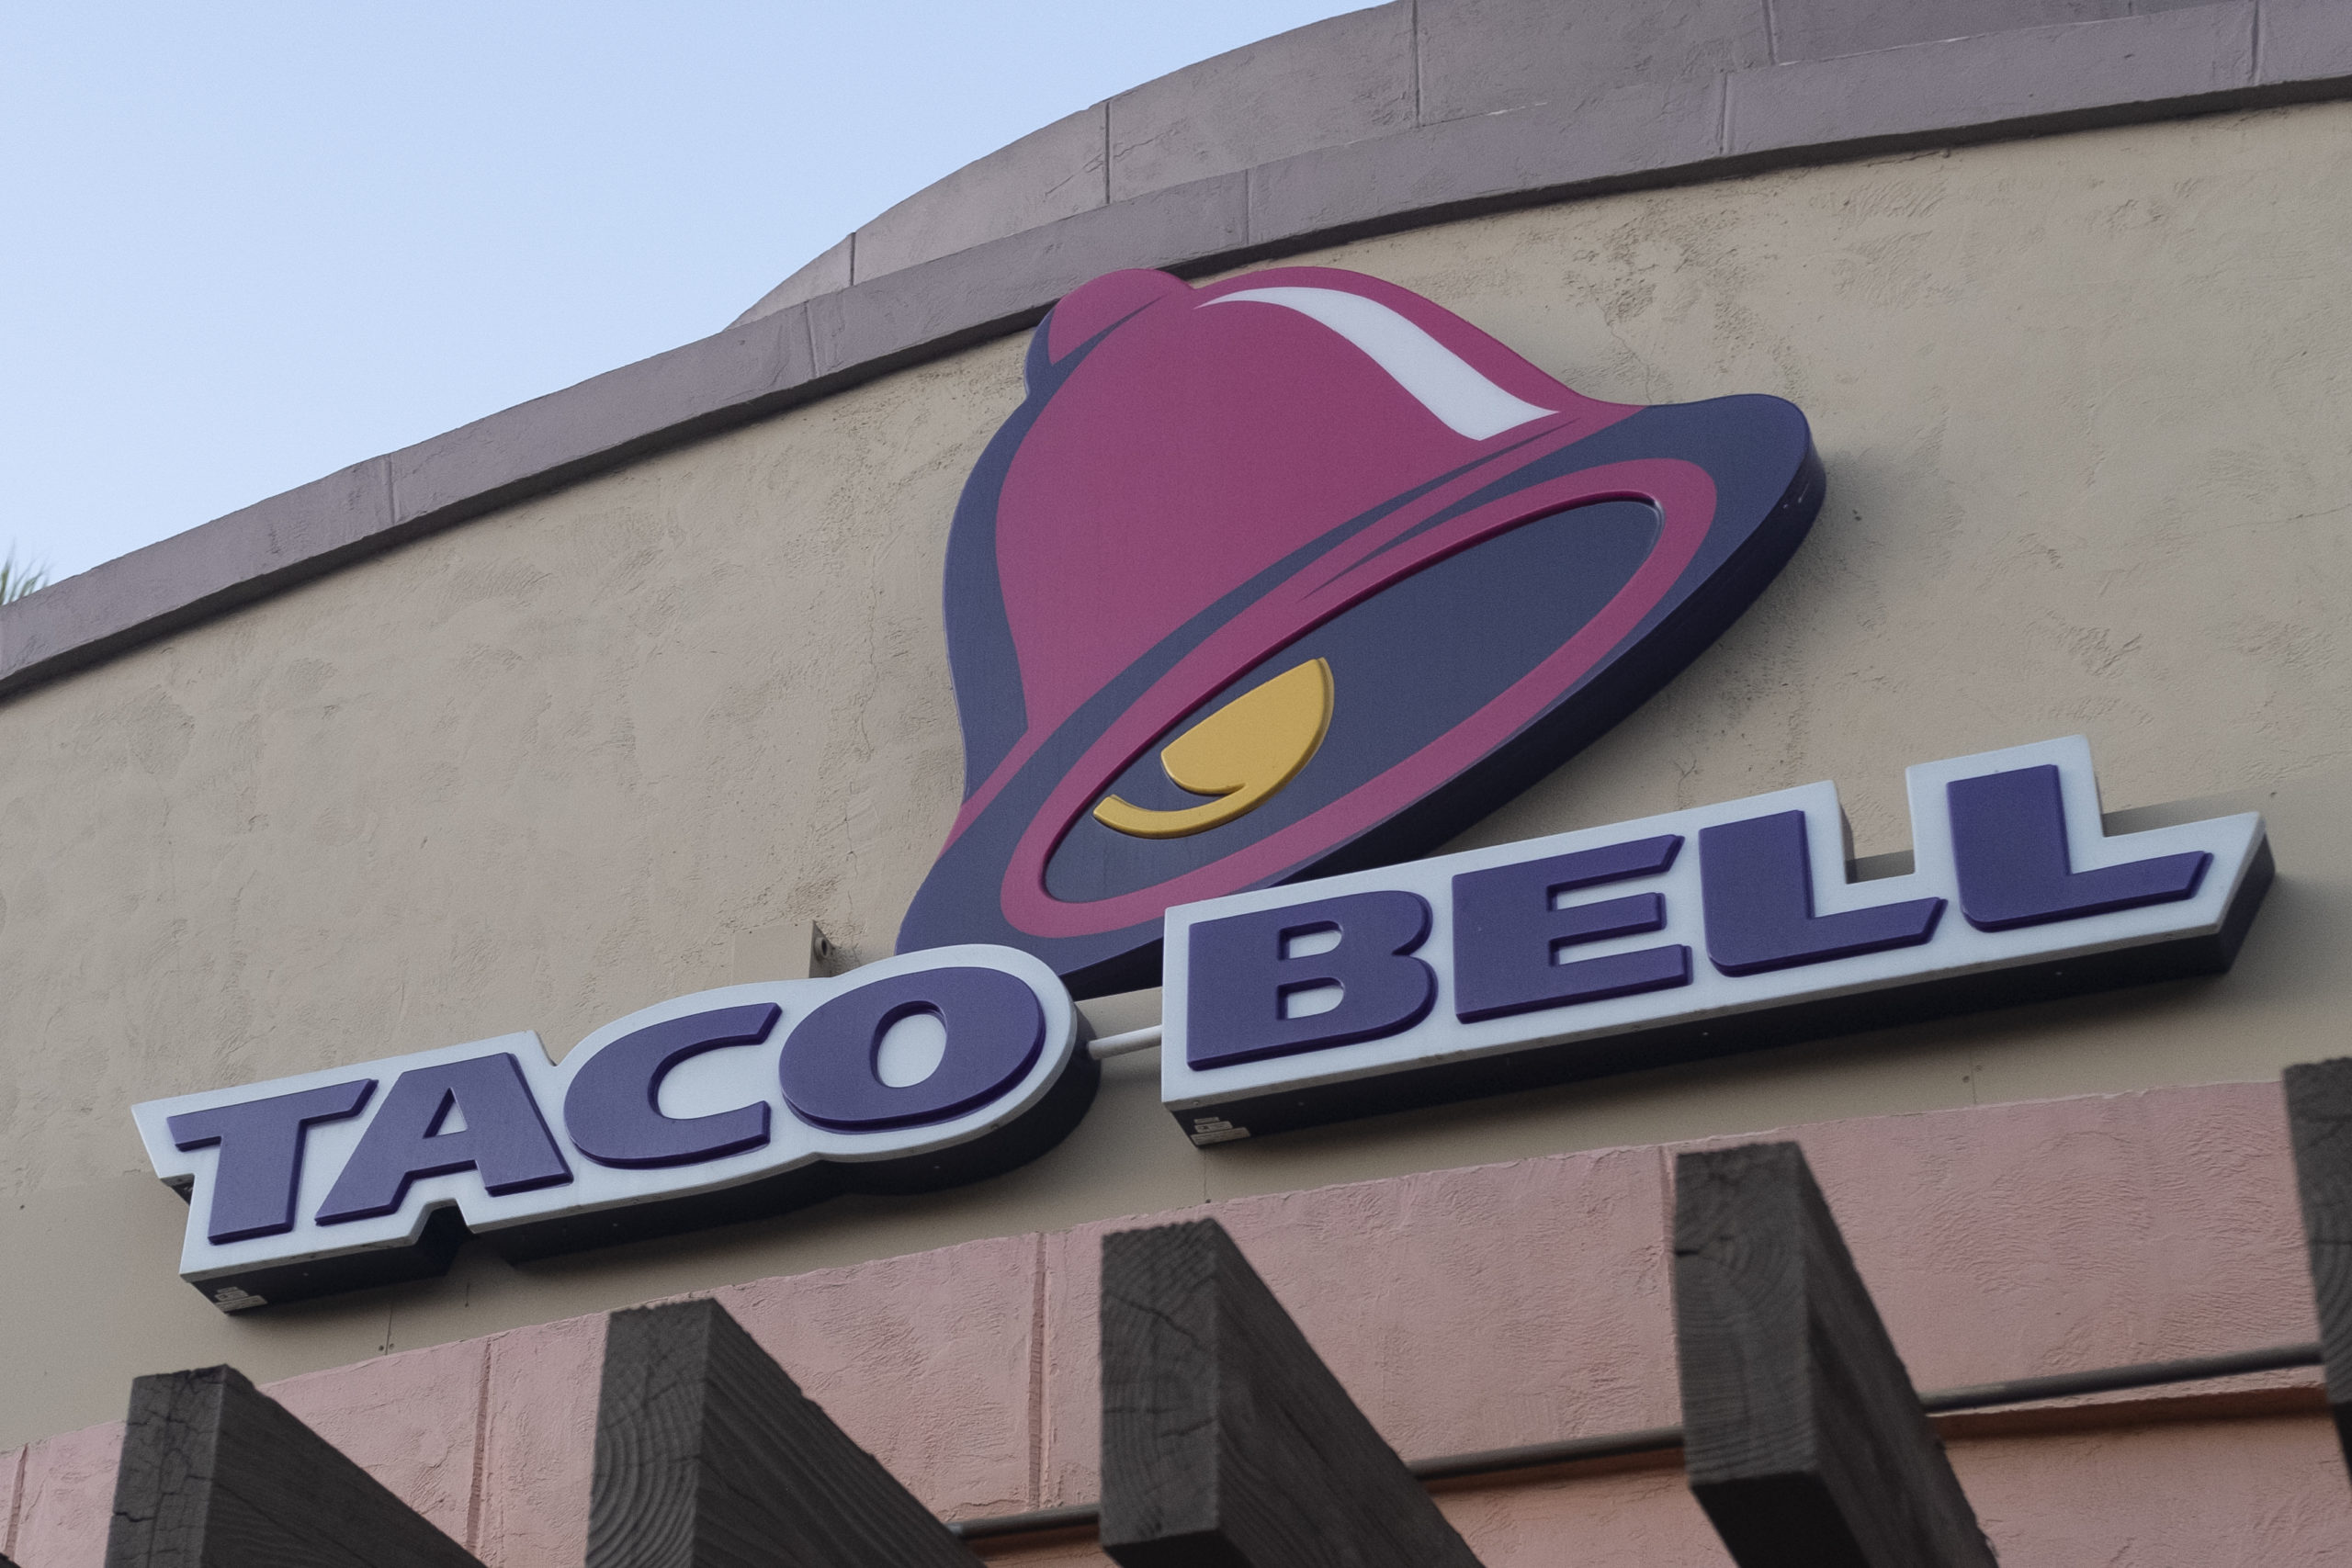 The Best Taco Bell Menu Items, According to the Staff